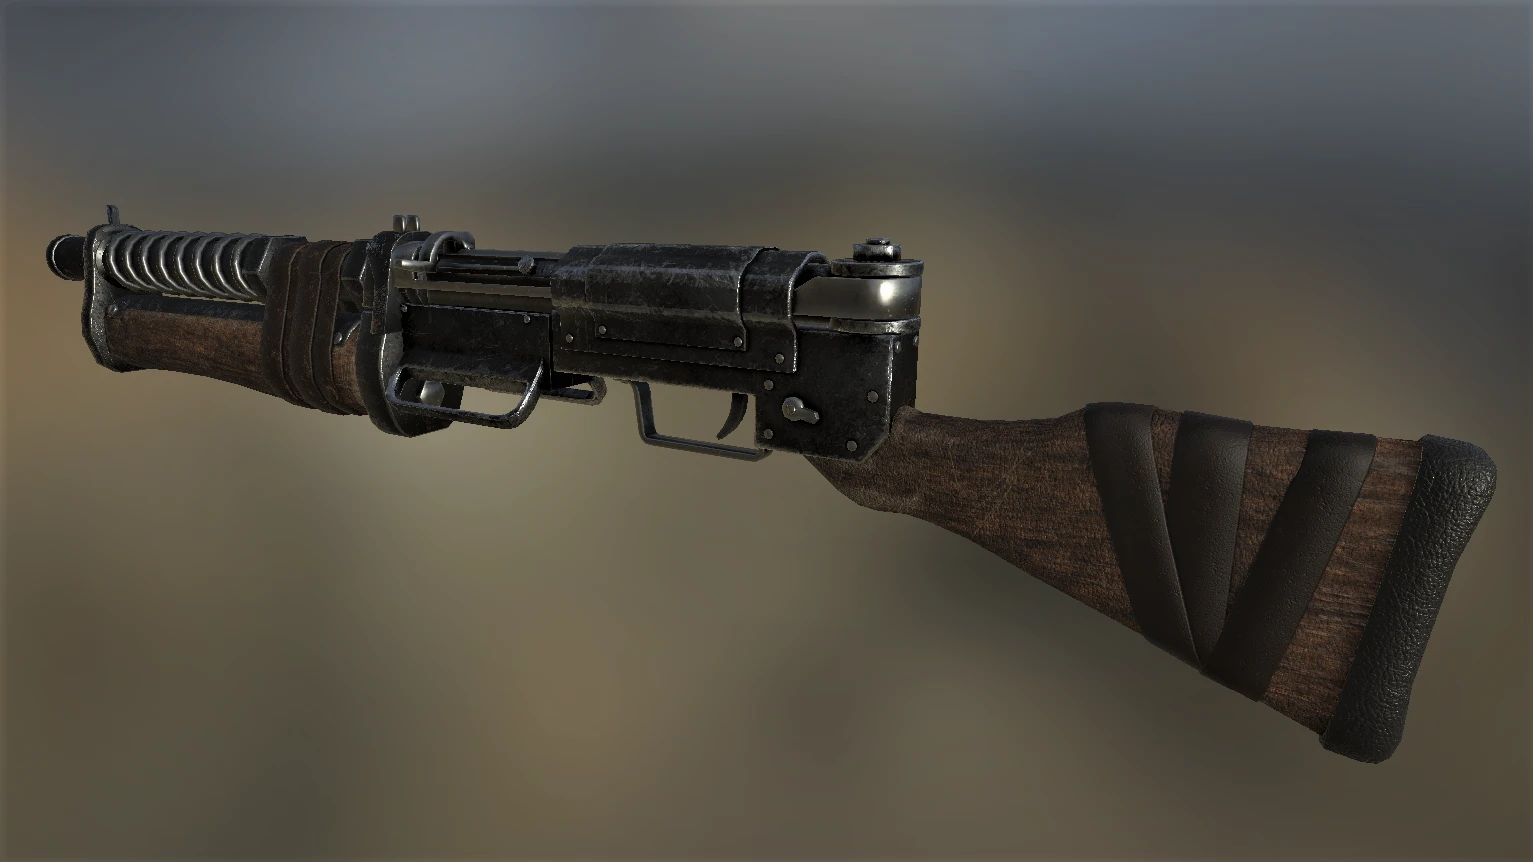 Fallout 4 handmade rifle in commonwealth фото 78